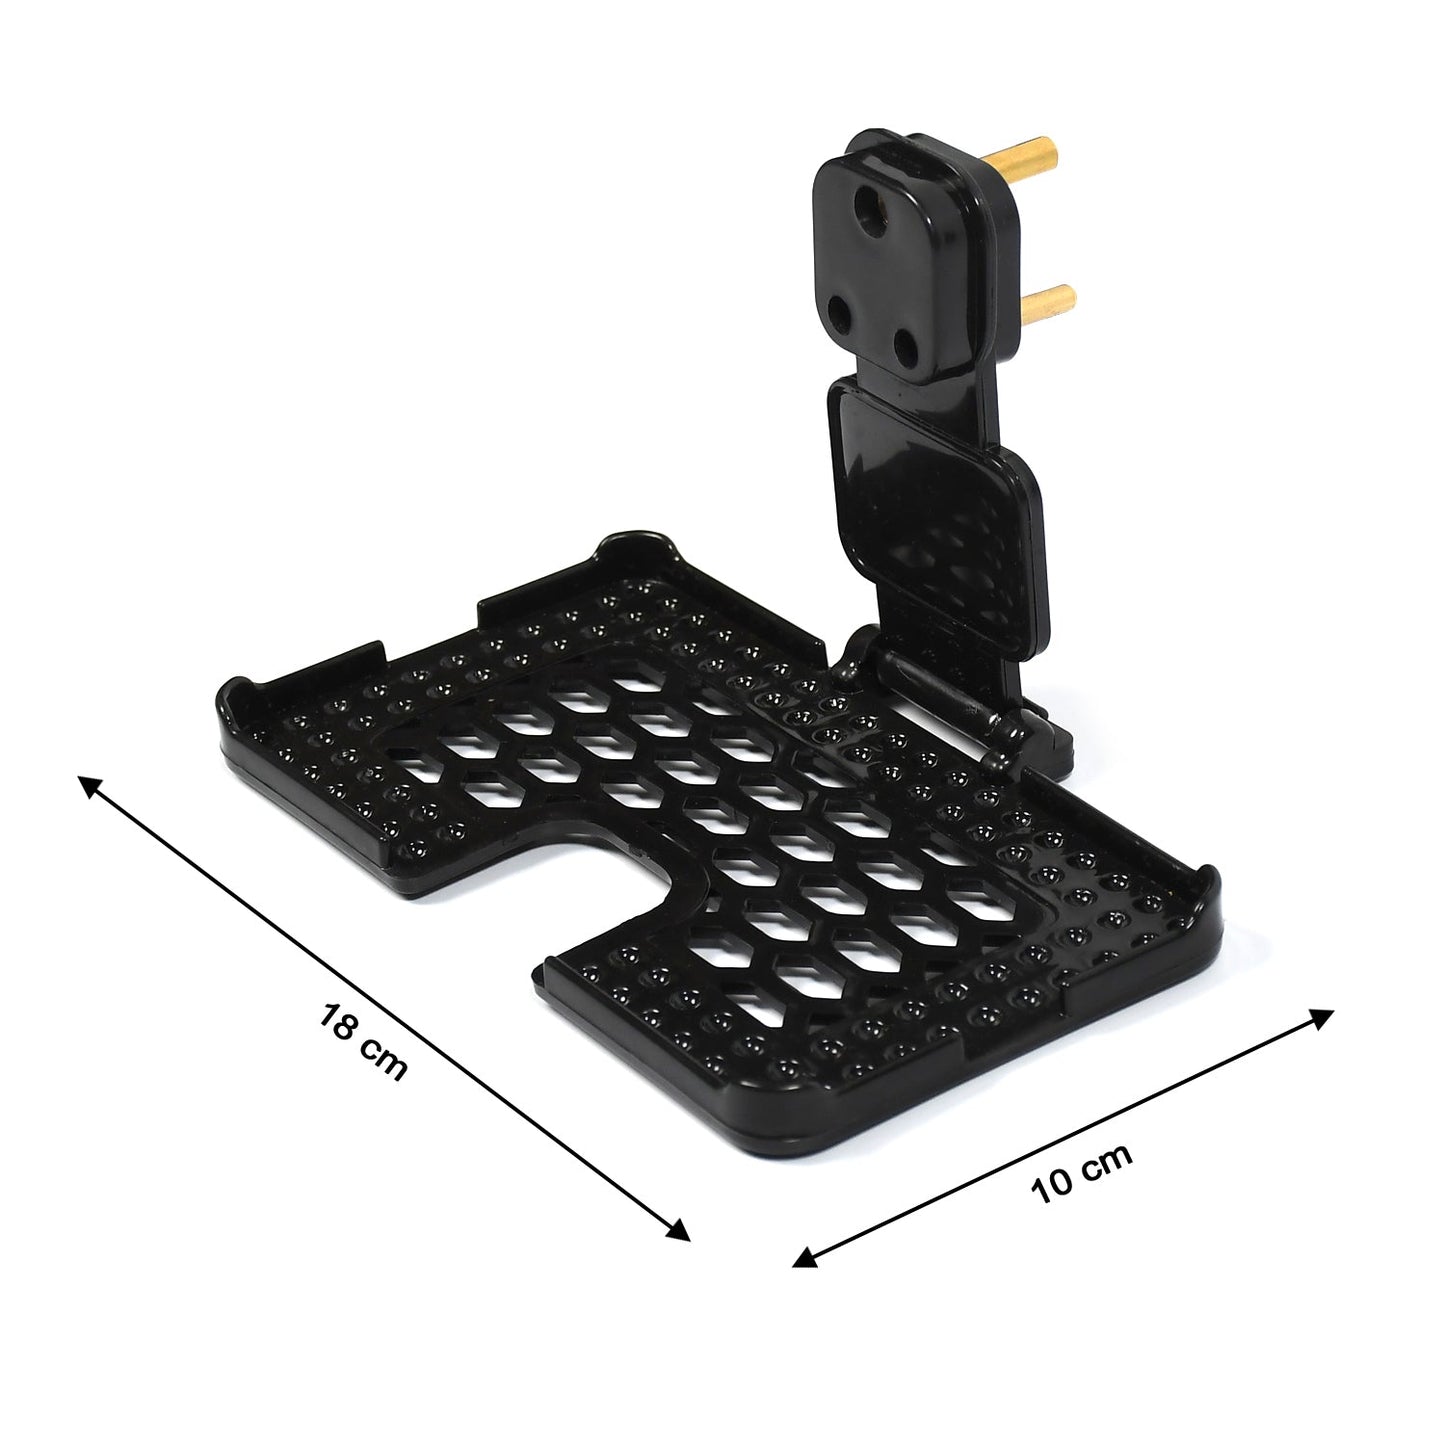 6496B  Multi-Purpose Wall Holder Stand for Charging Mobile Just Fit in Socket and Hang ( Black ) 